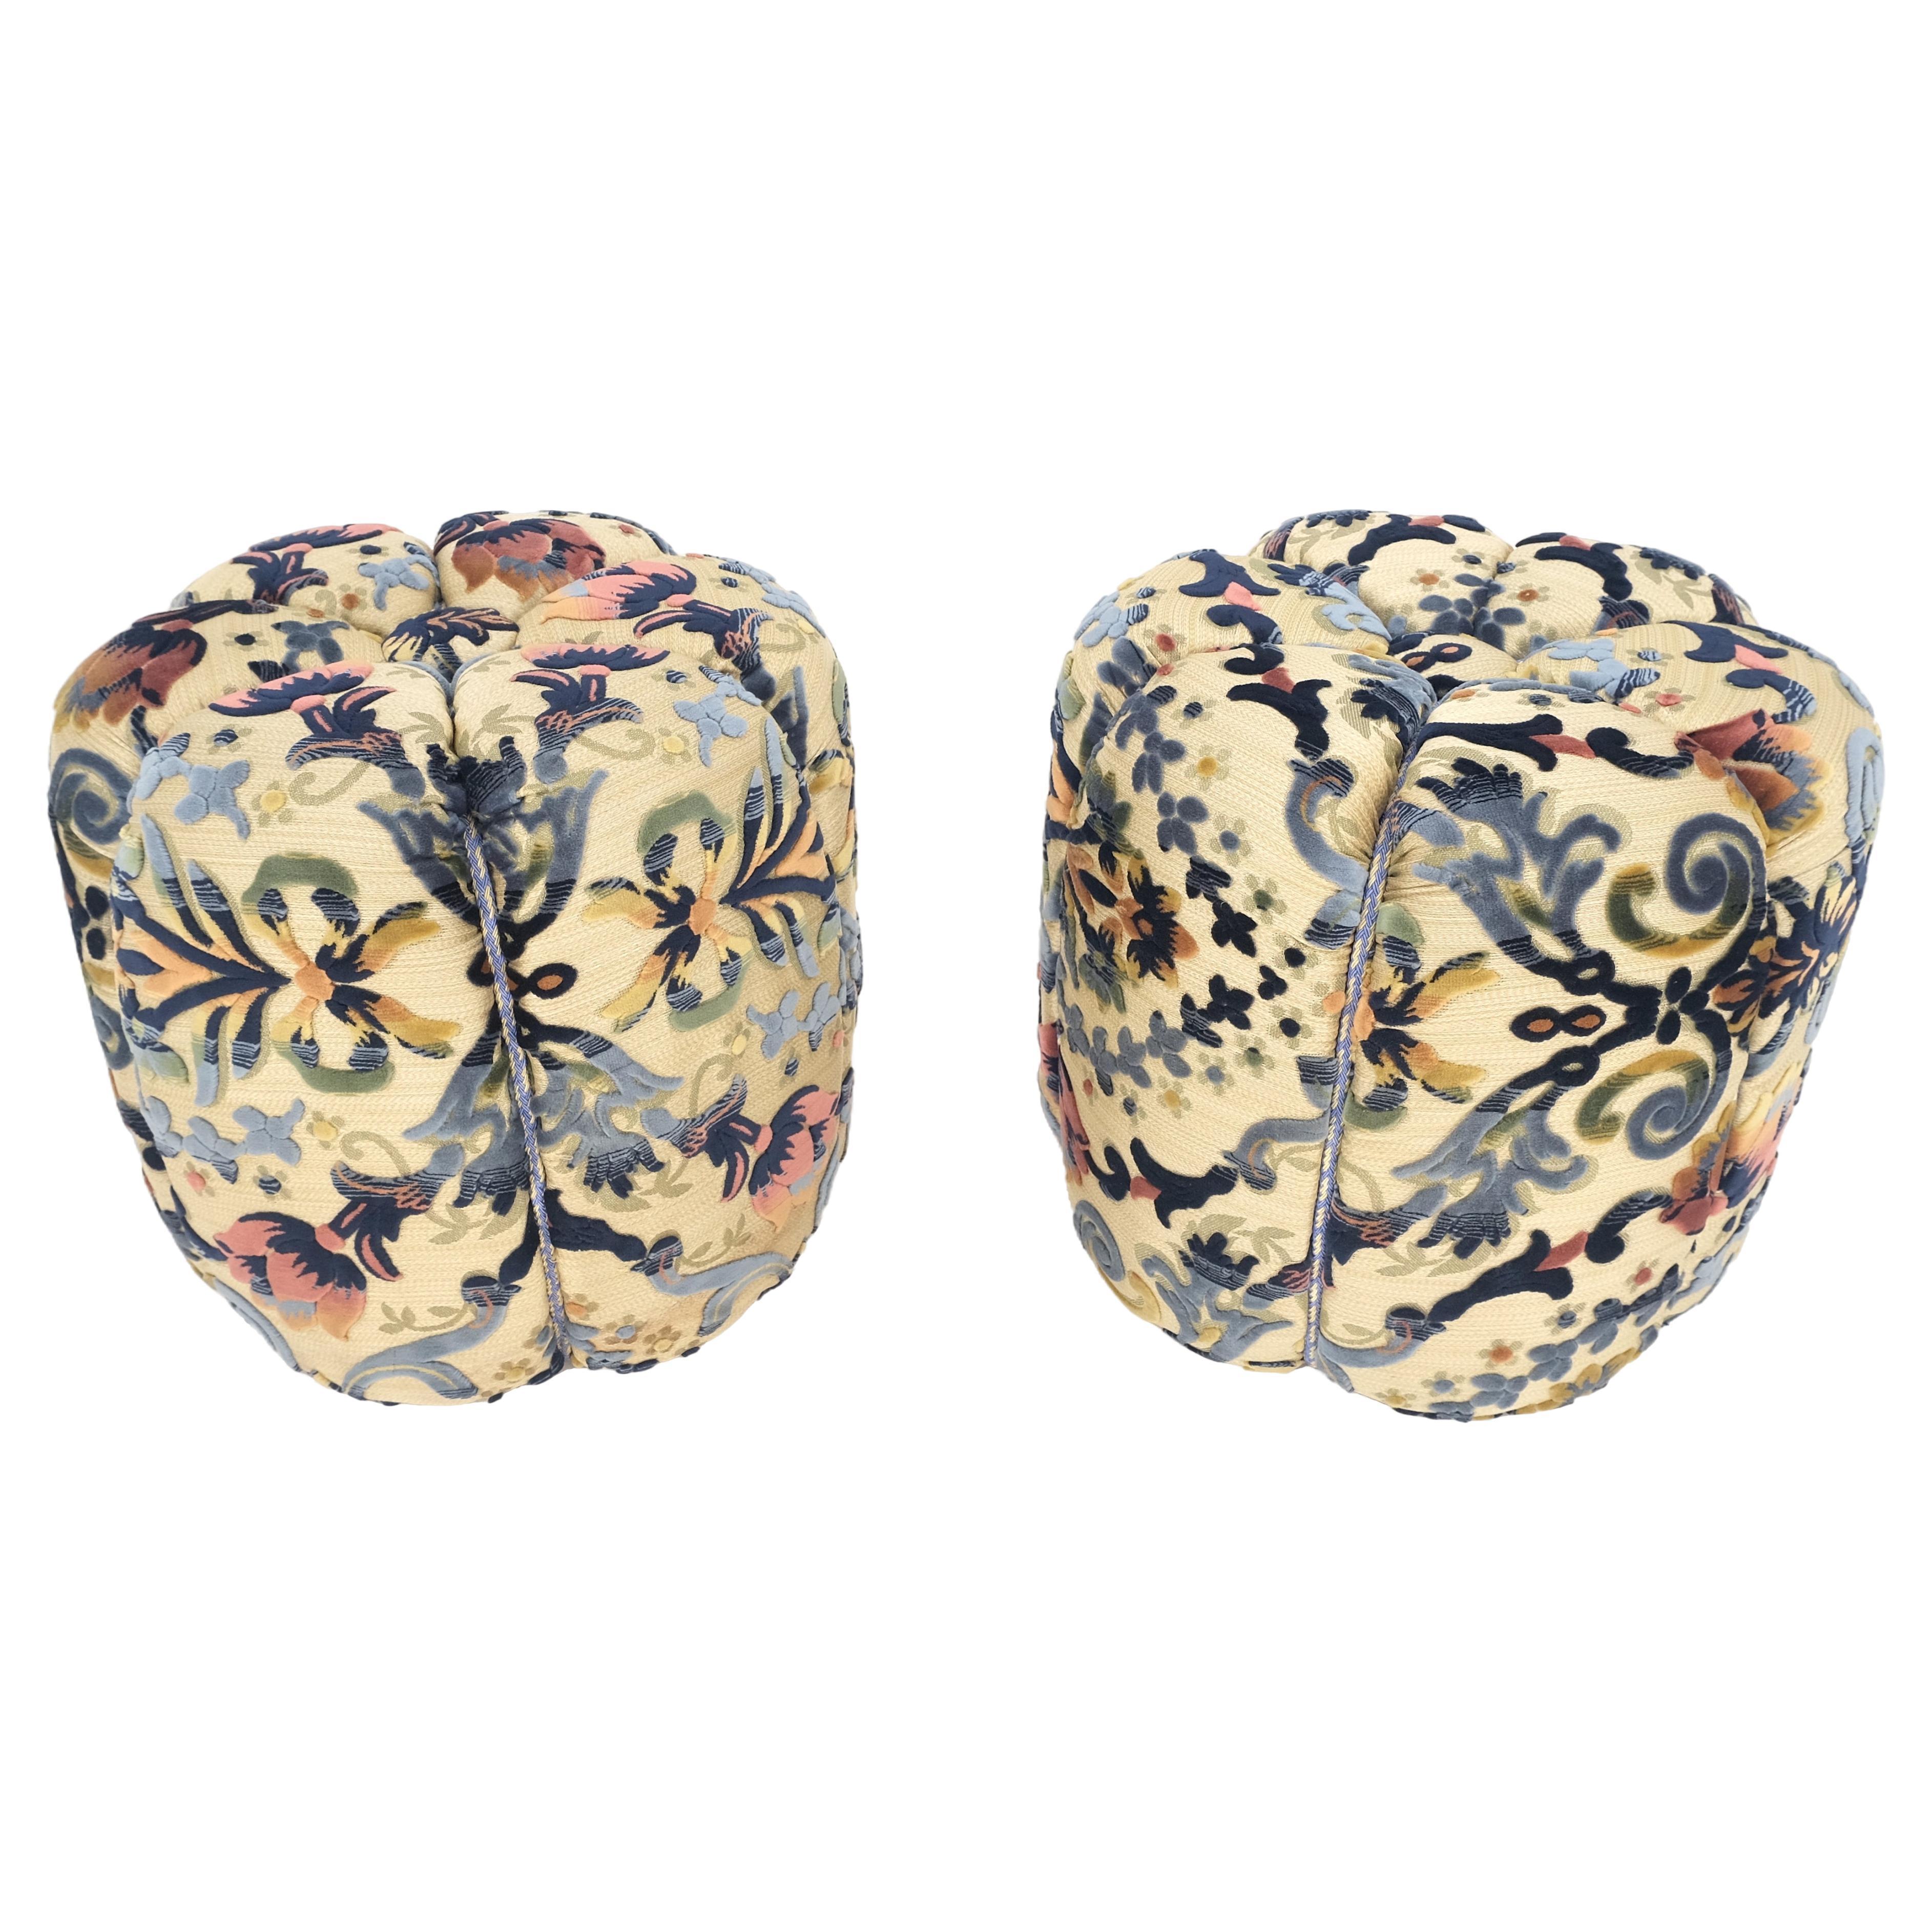 Pair of Floral Upholstery Custom Studio Made Ottomans Poufs Benches Stool MINT! For Sale